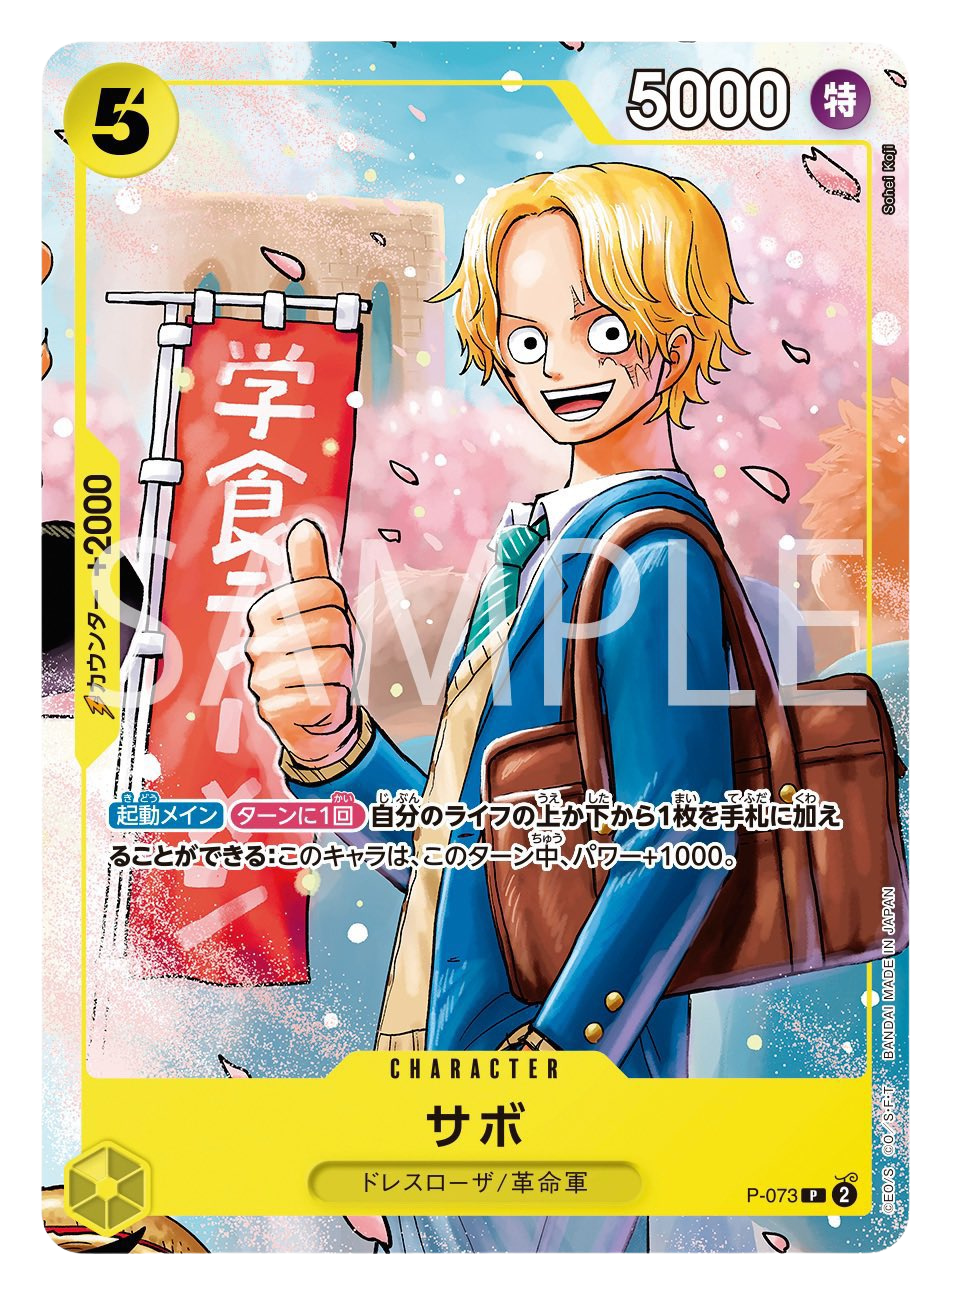 ONE PIECE CARD GAME - SAIKYO JUMP LIMITED EXCLUSIVE - LUFFY - ACE - SABO - THE STRONGEST 3 BROTHERS PACK - SPECIAL SET 3Pcs